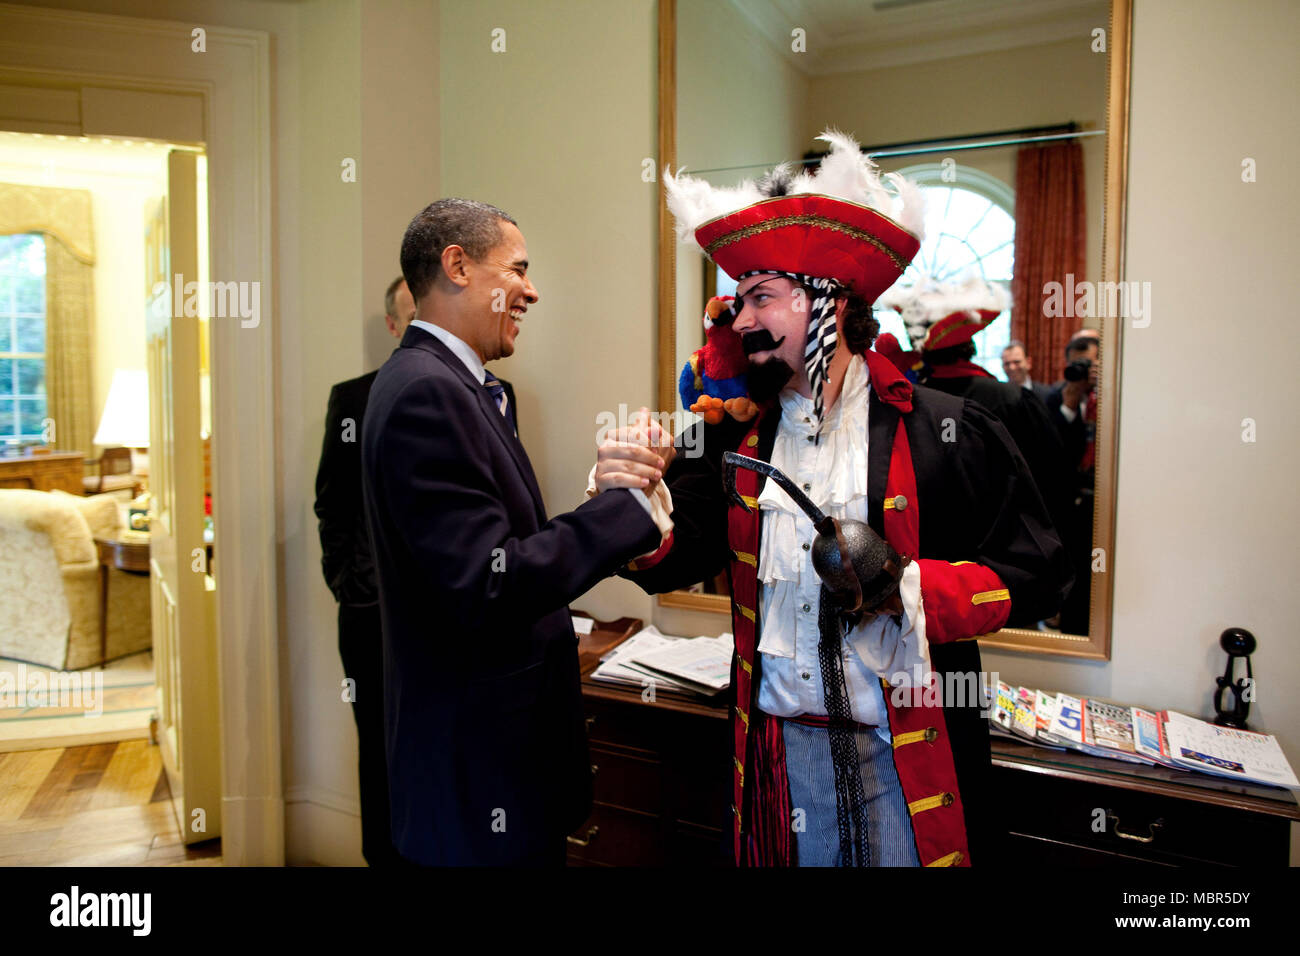 President Barack Obama reacts to seeing speechwriter Cody Keenan dressed up as Captain Hook.  Keenan dressed as a pirate for an Oval Office photo shot for use in the President's speech to the White House Correspondents Association dinner May 9, 2009.  Official White House Photo by Pete Souza. Stock Photo